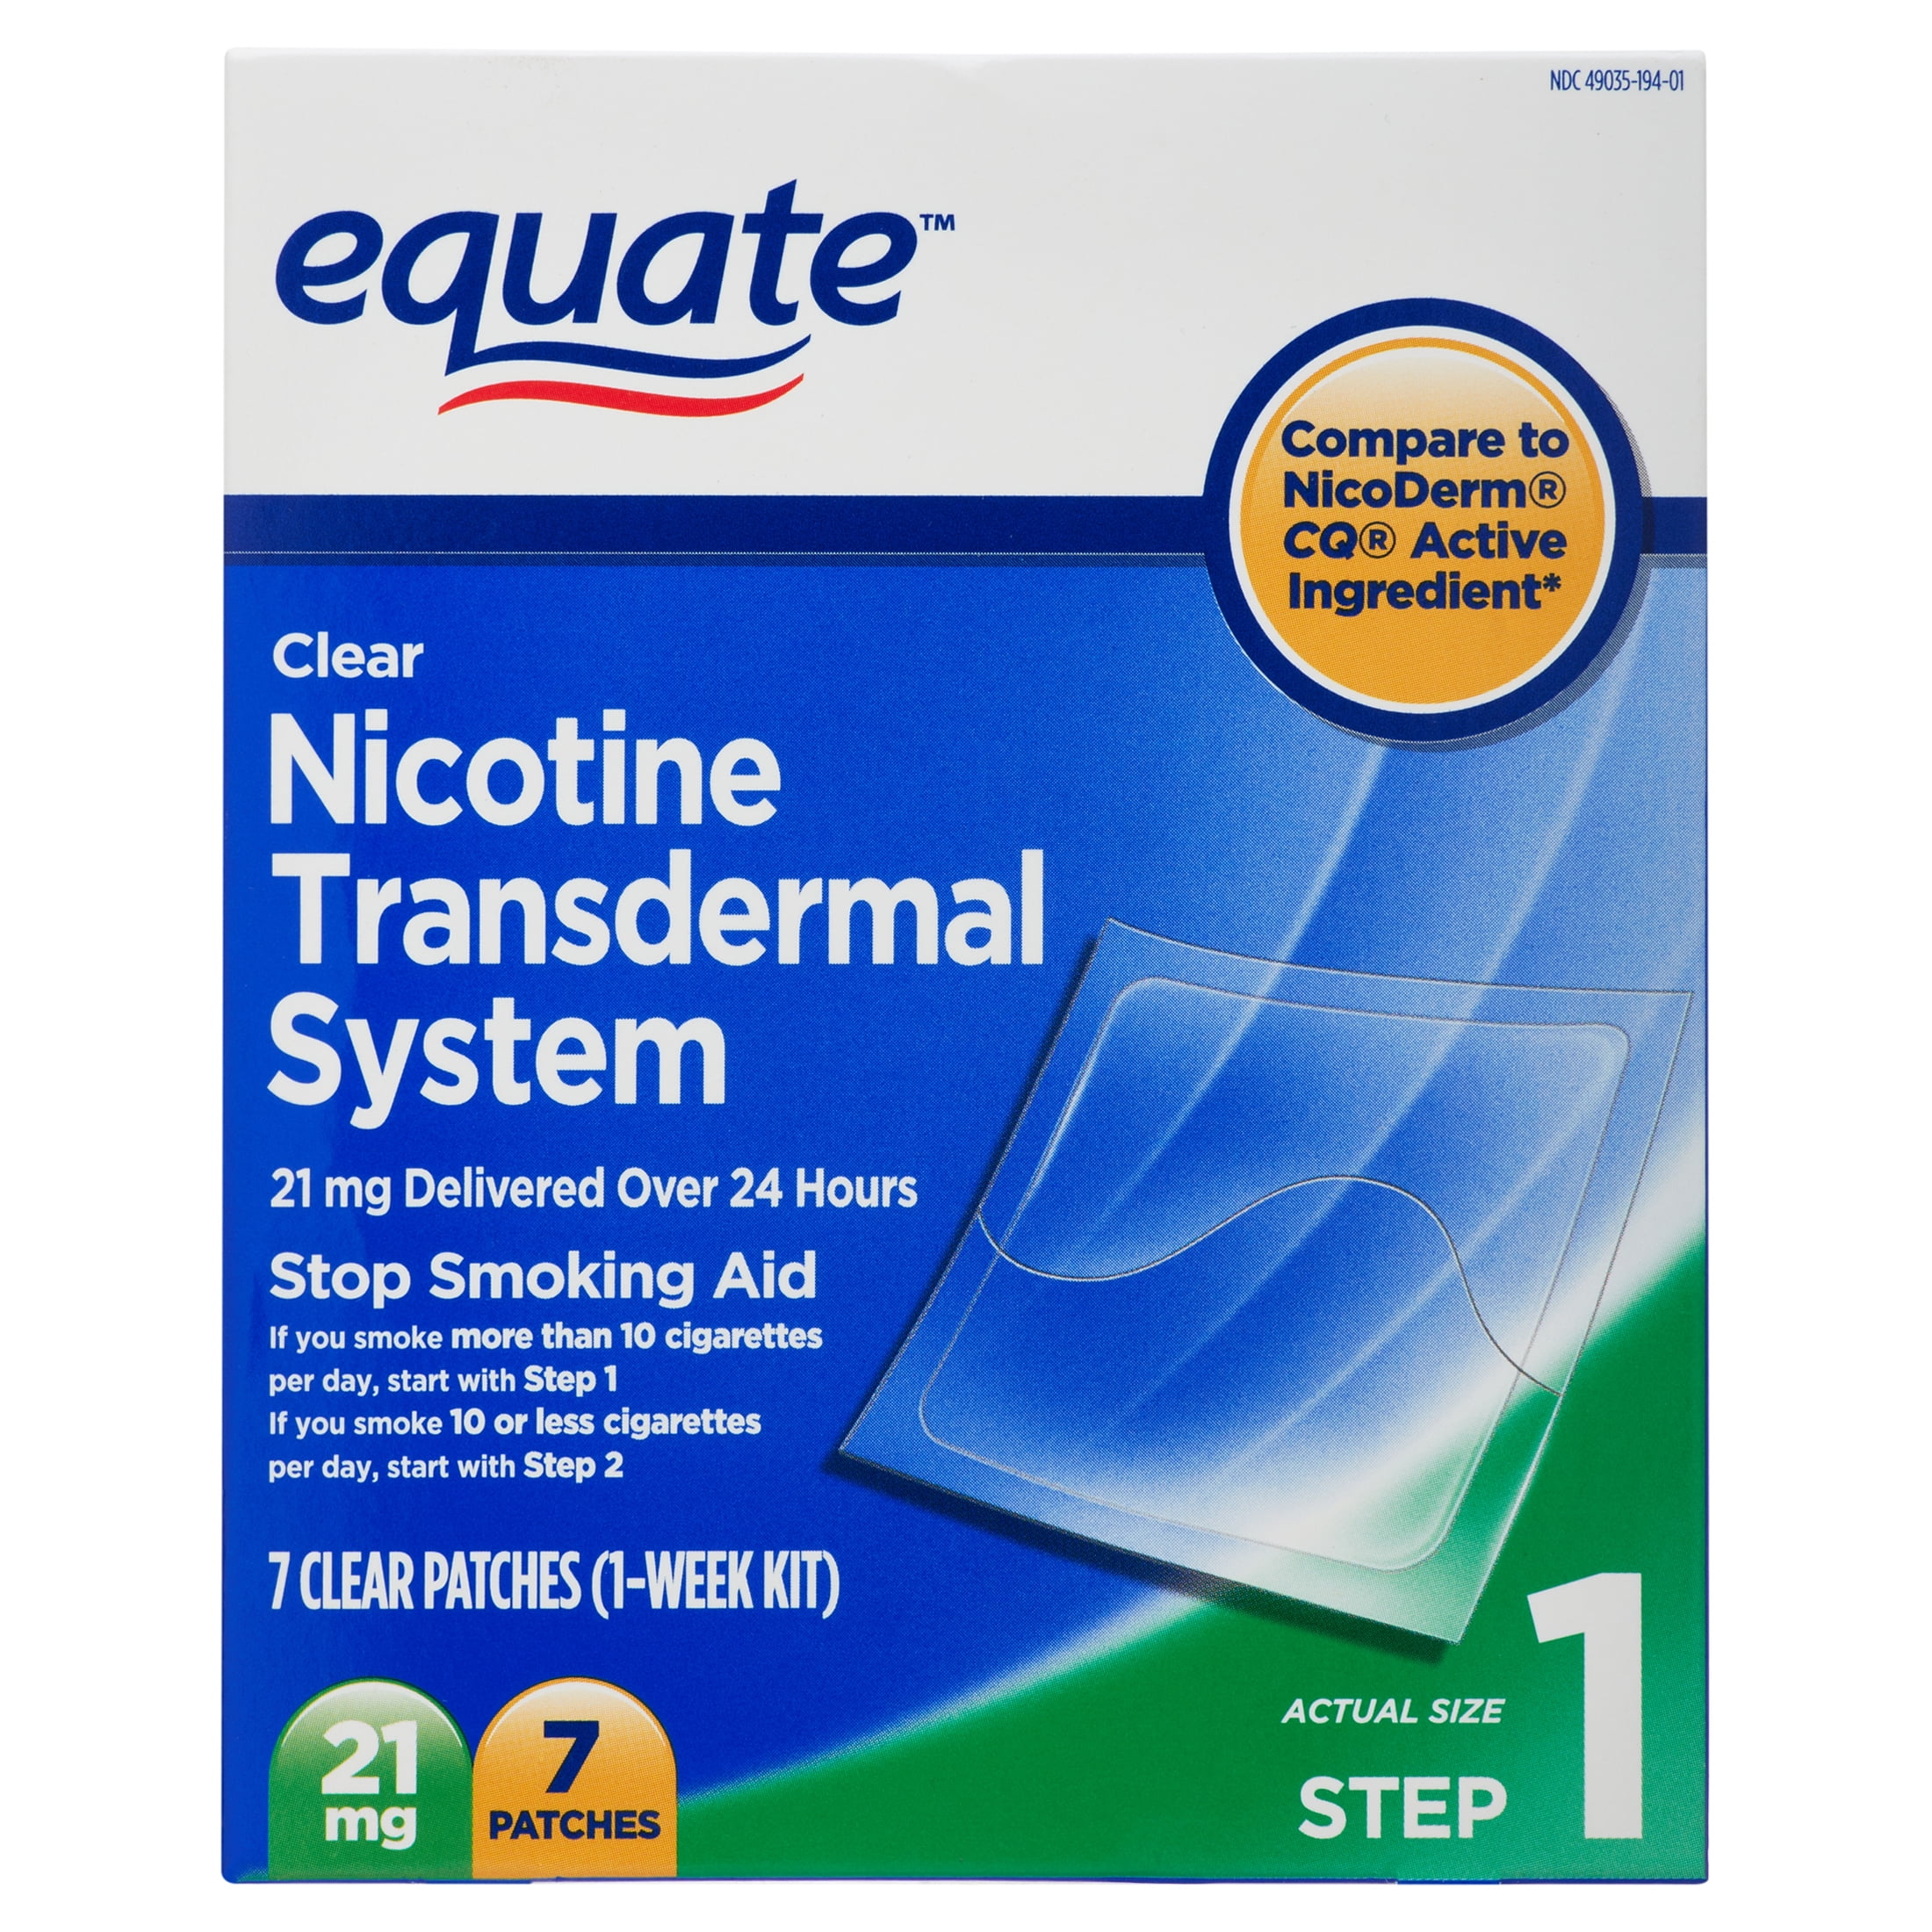 Equate Nicotine Transdermal System Patches, Step 1, 21 mg, 7 Count